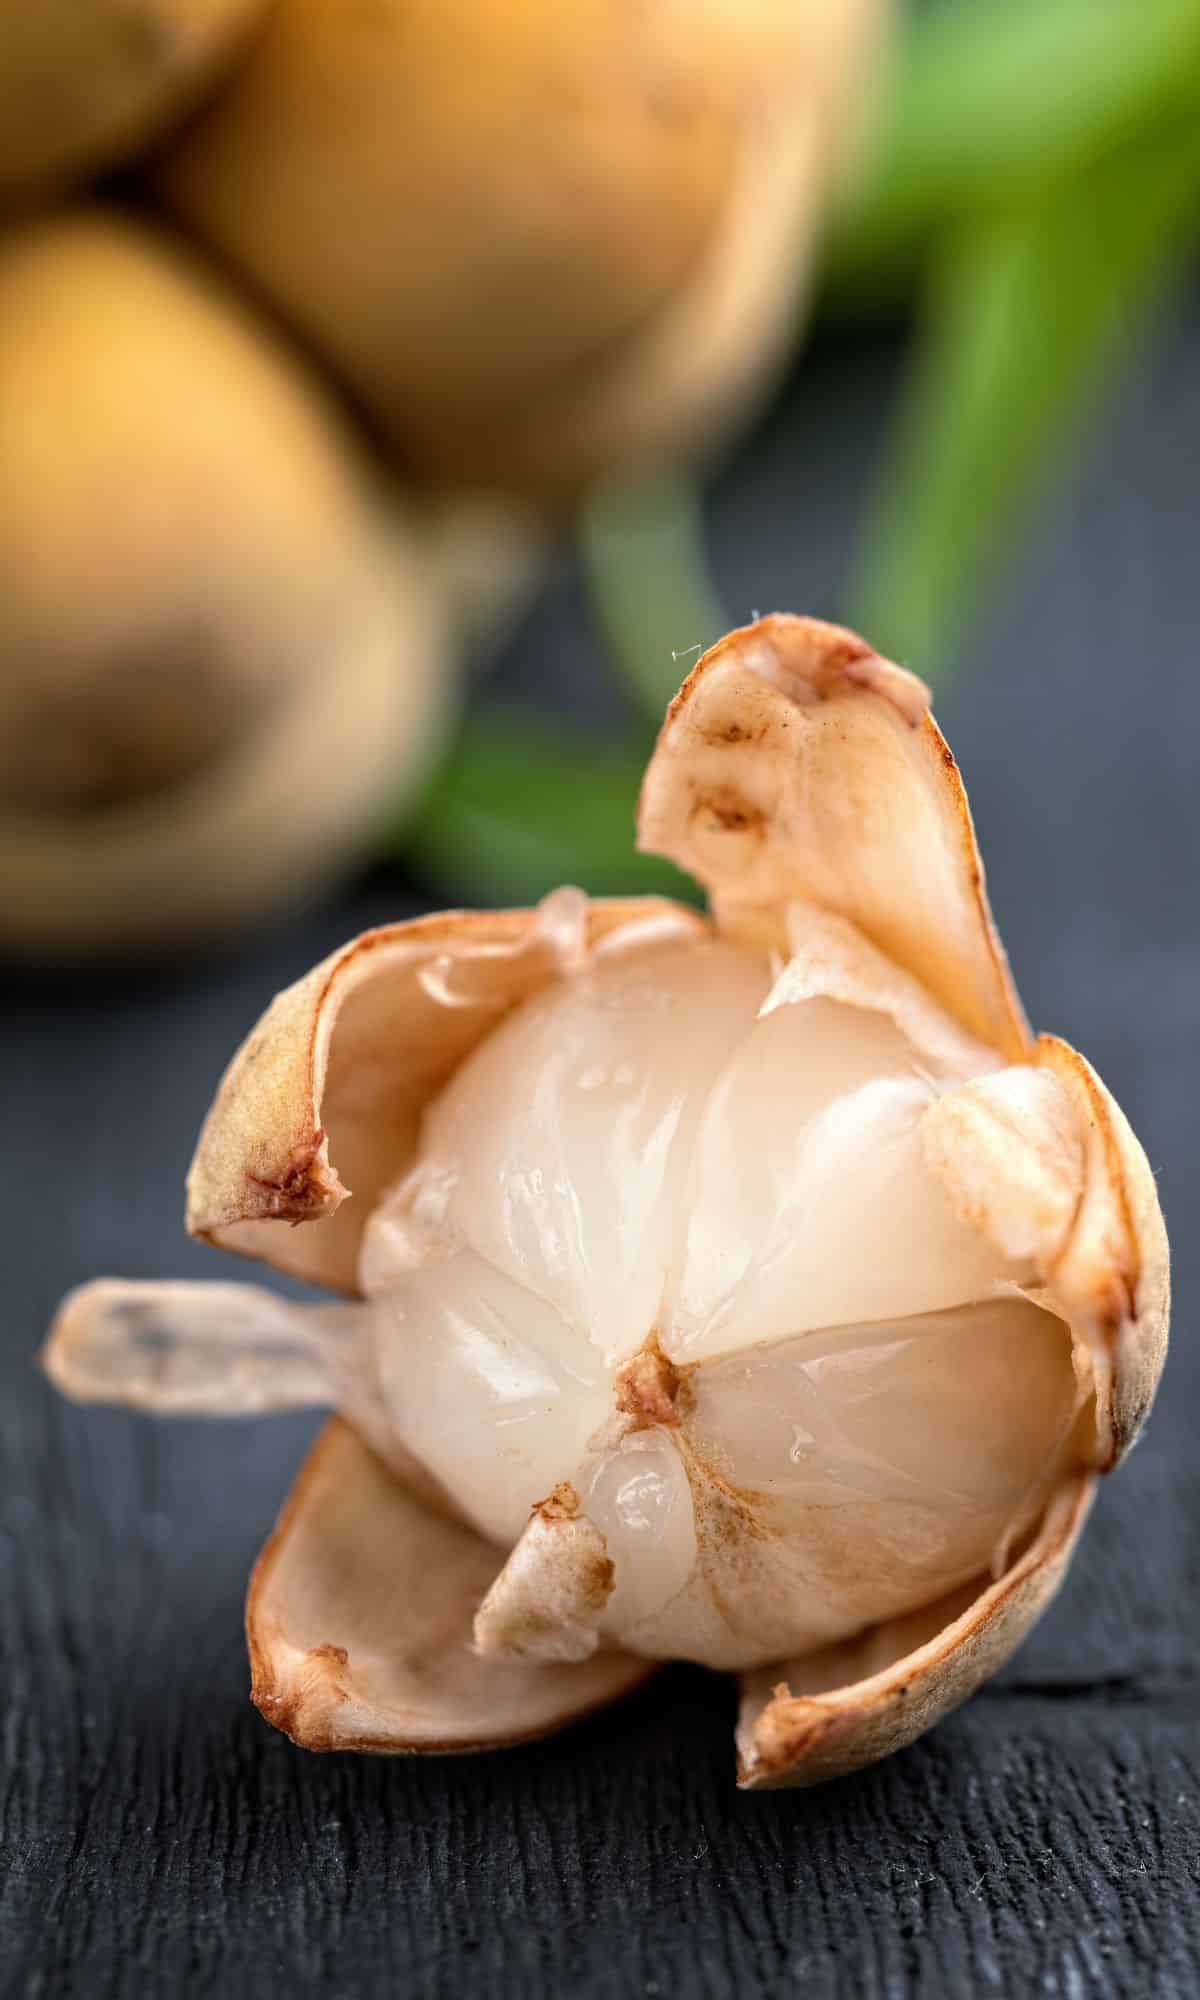 an images of langsat fruit, on a table, peeled.